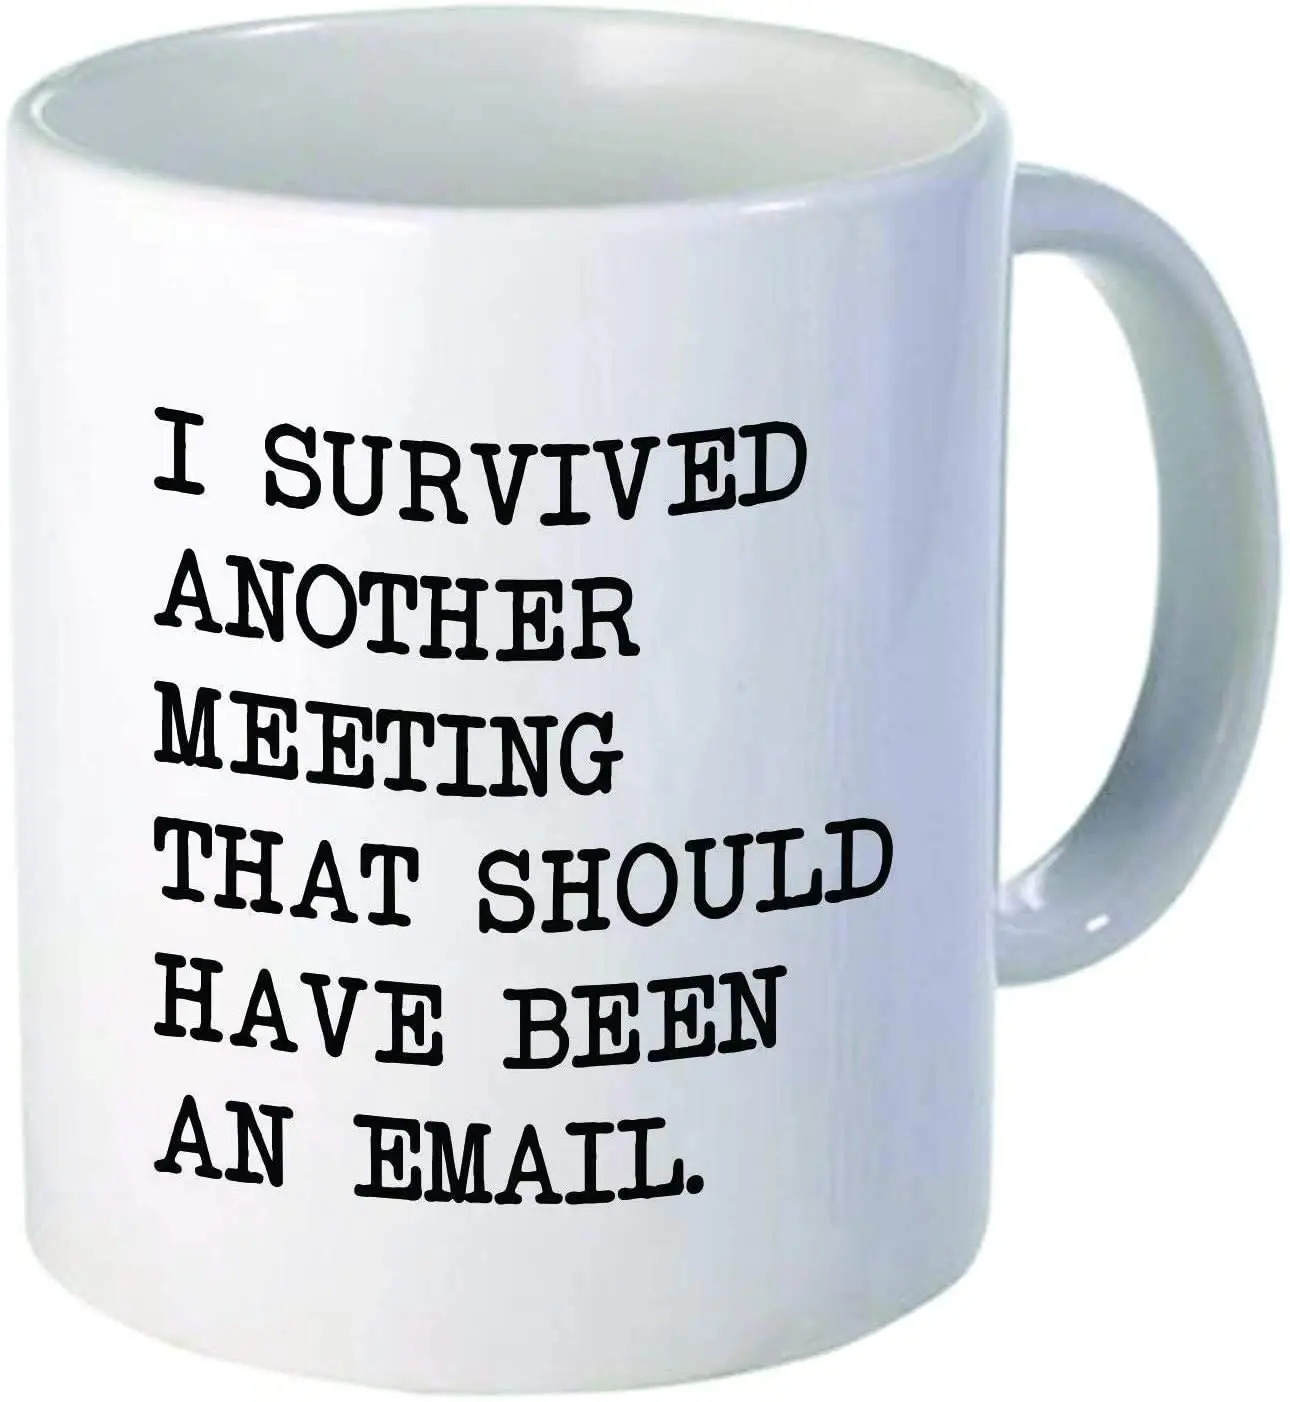 

I survived another meeting... should have been an email - Funny coffee mug by Donbicentenario - 11OZ Ceramic - Best gift or souv